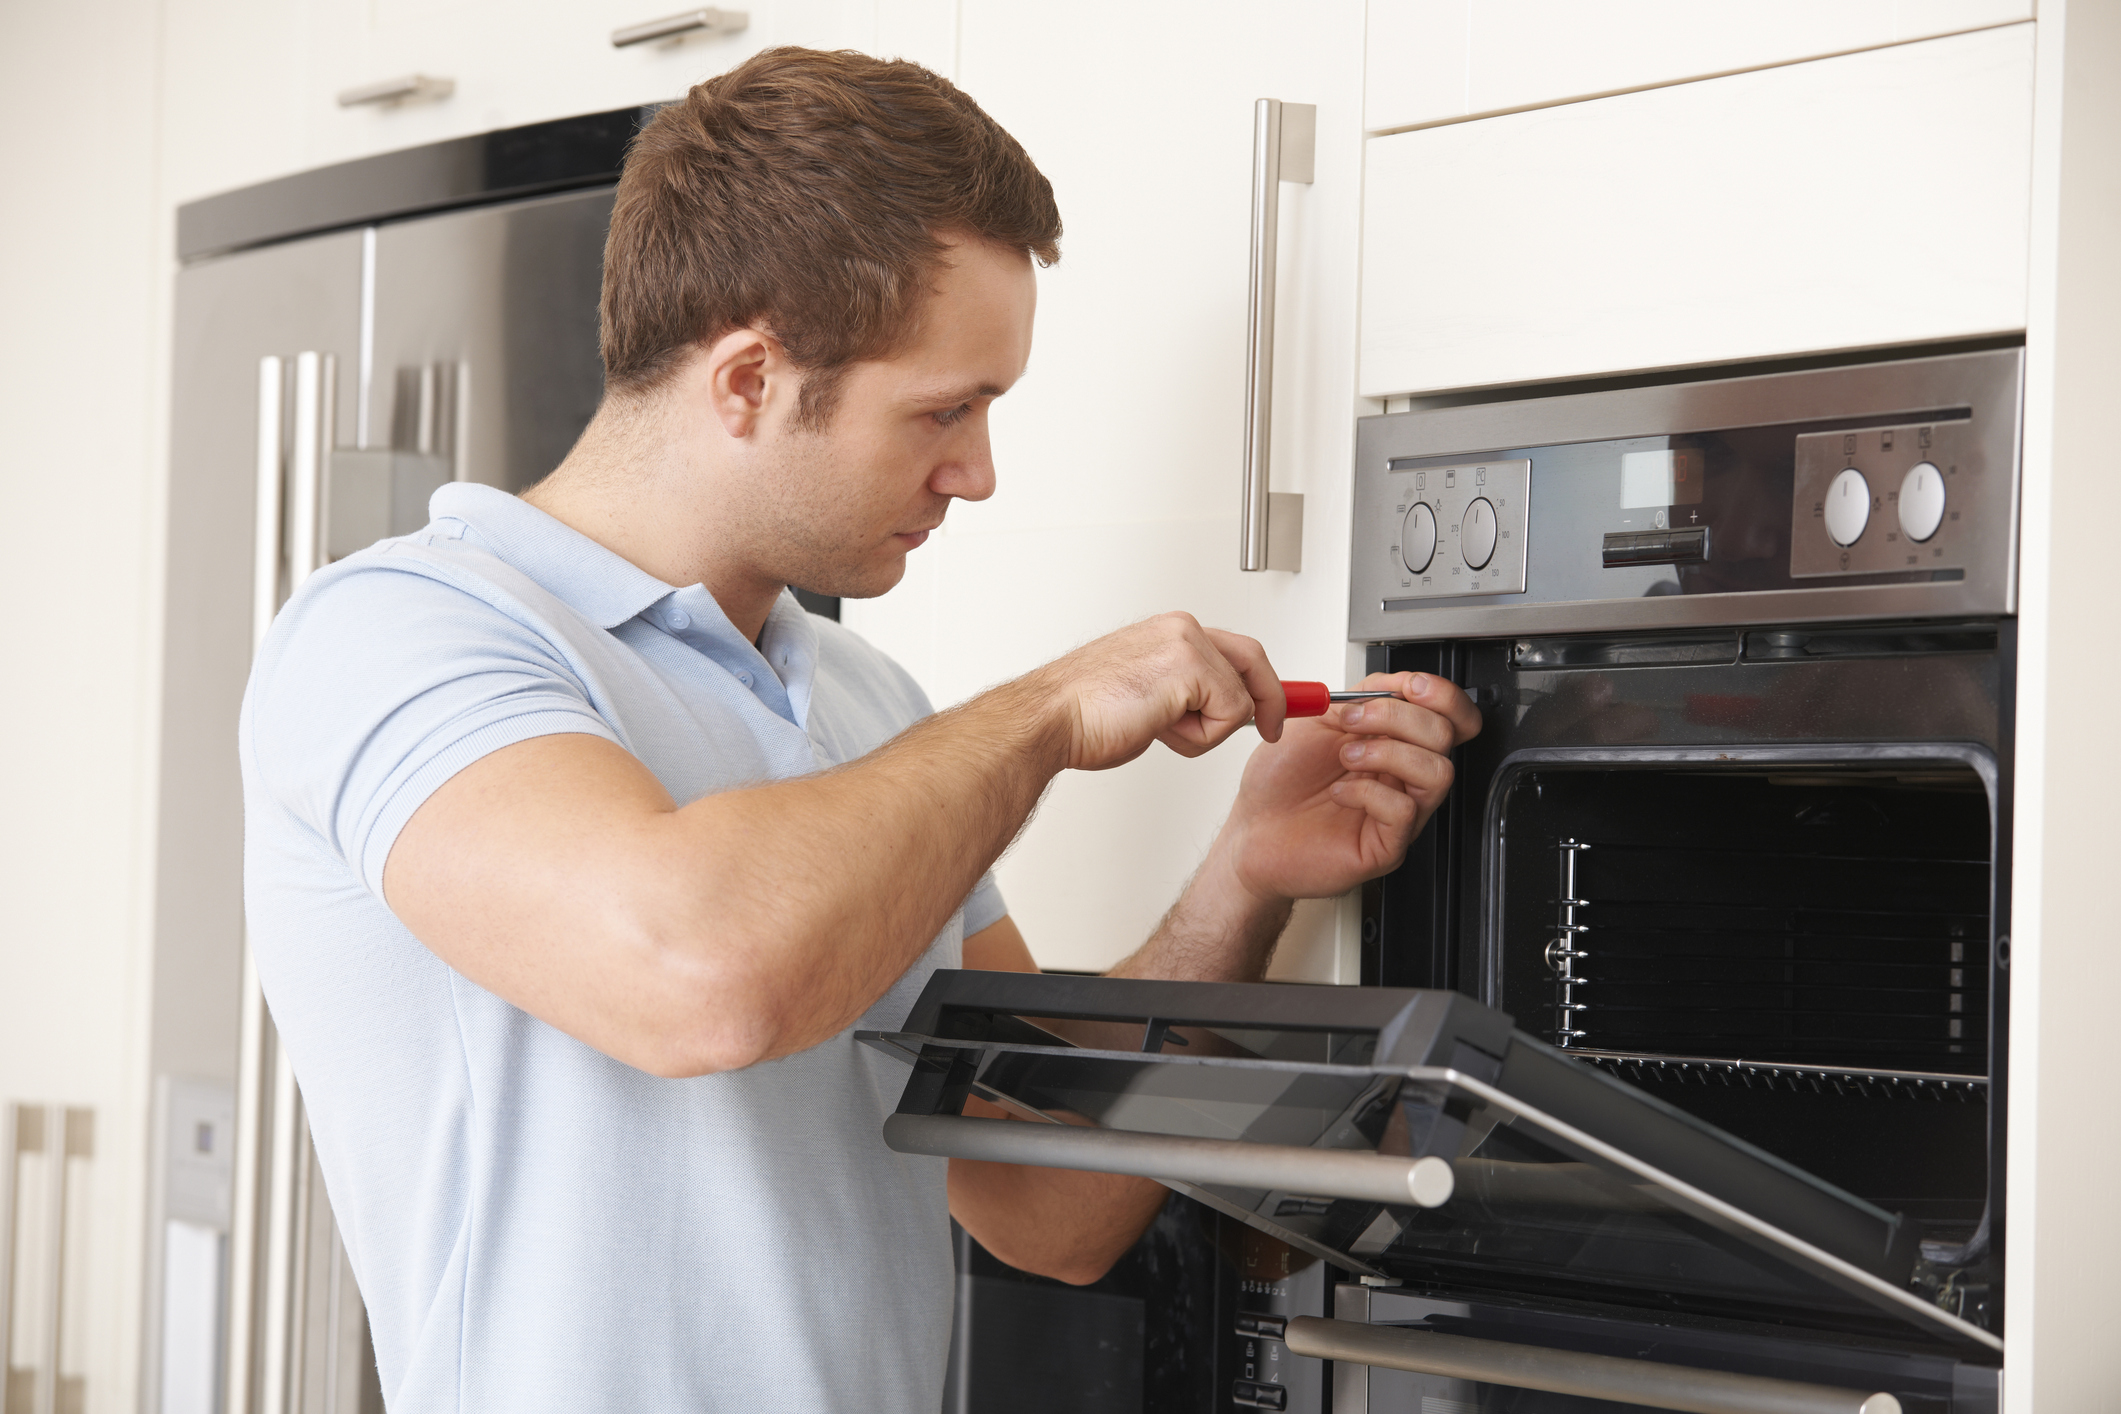 The 10 Best Appliance Repairers in San Francisco, CA 2021